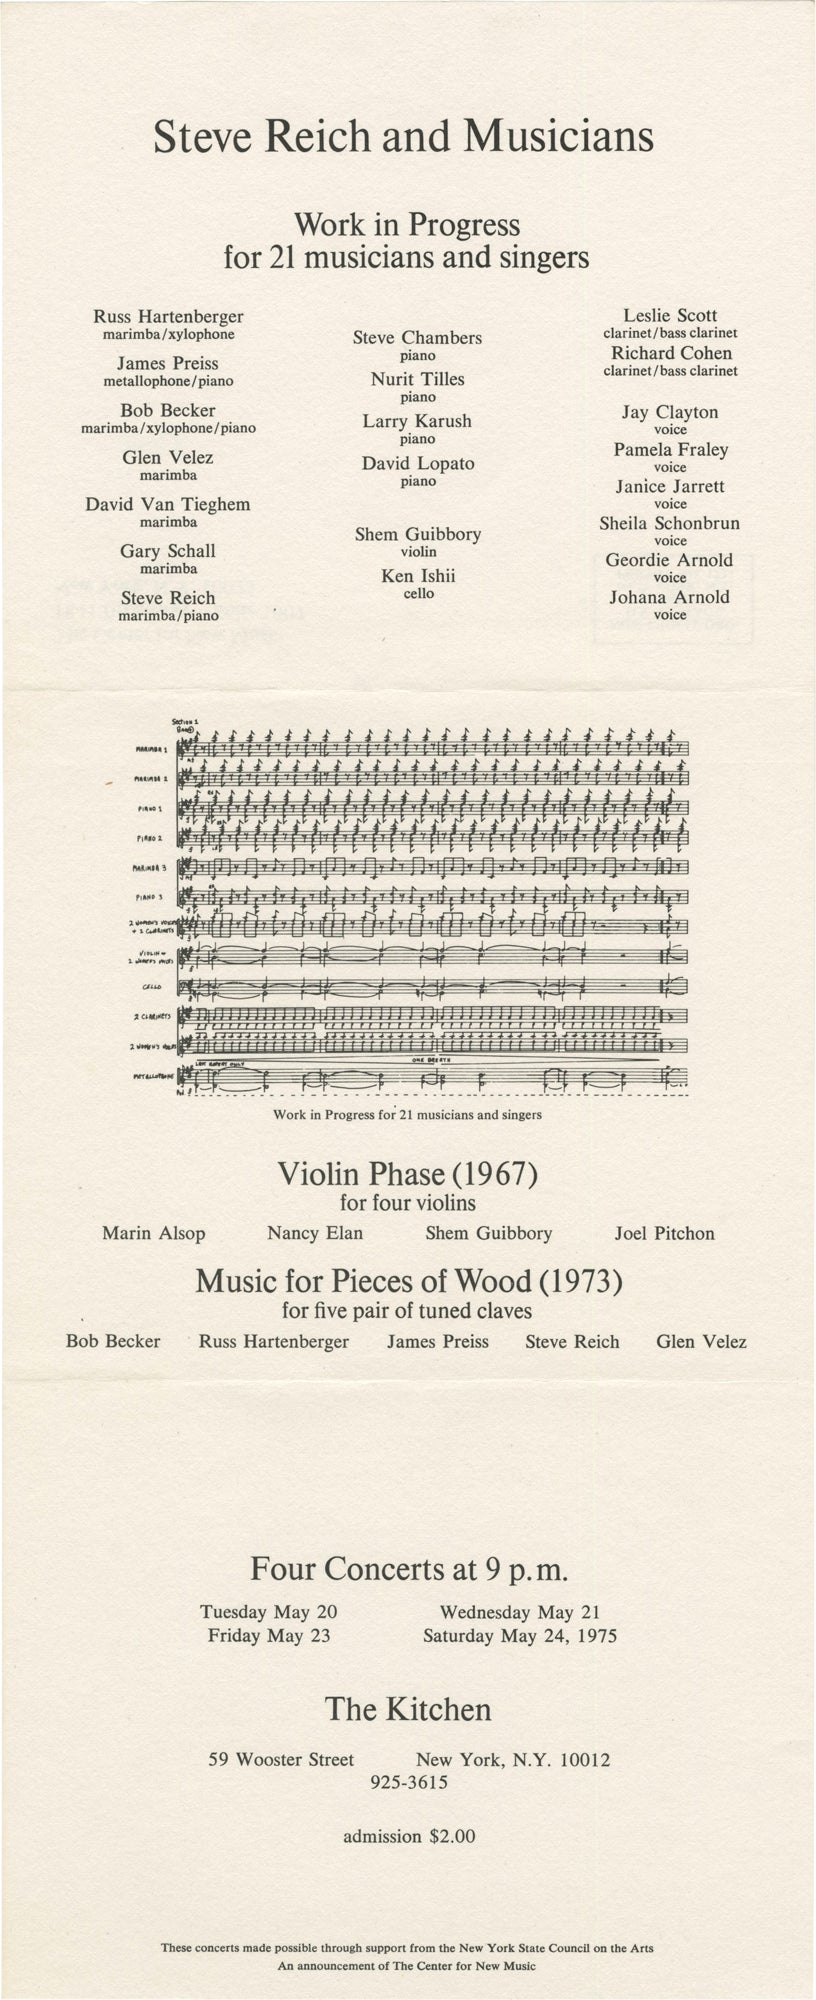 Original invitation for Steve Reich and Musicians, Four Concerts, May 20, 21, 23, 24, Work in Progress for 21 musicians and singers 1975 , Violin Phase 1967 , Music for Pieces of Wood | Steve Reich, performer